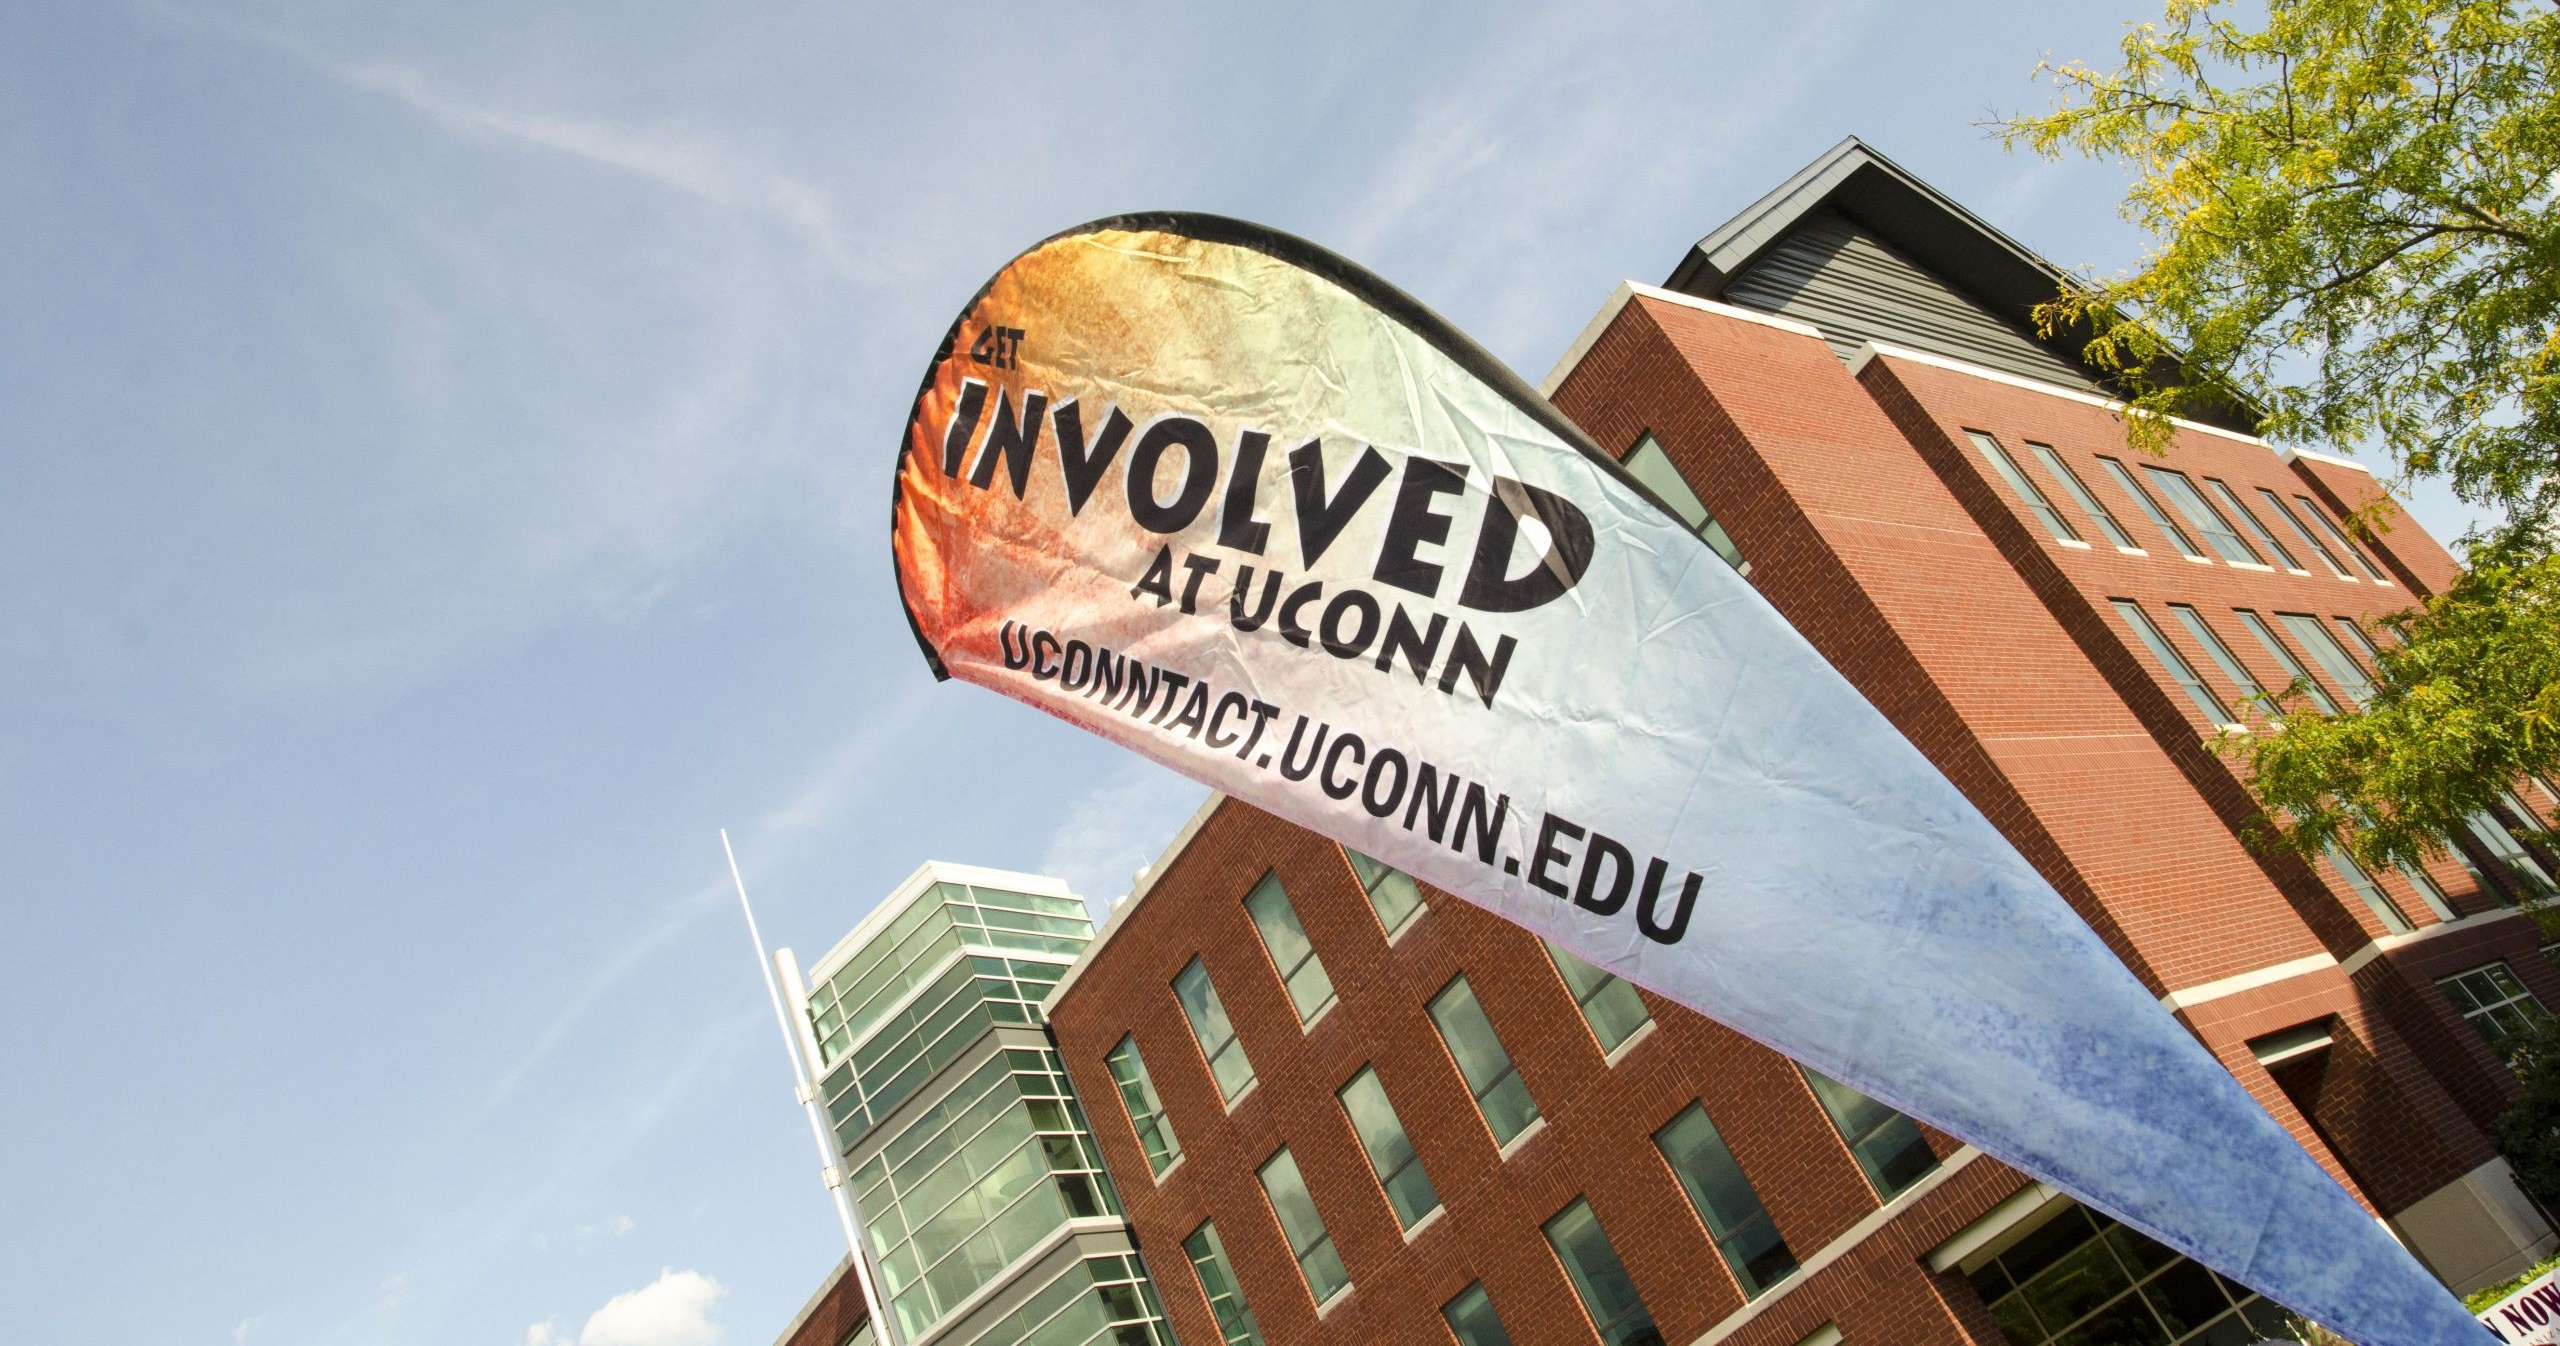 promotional flag outside of university building encouraging students to get involved at UConn